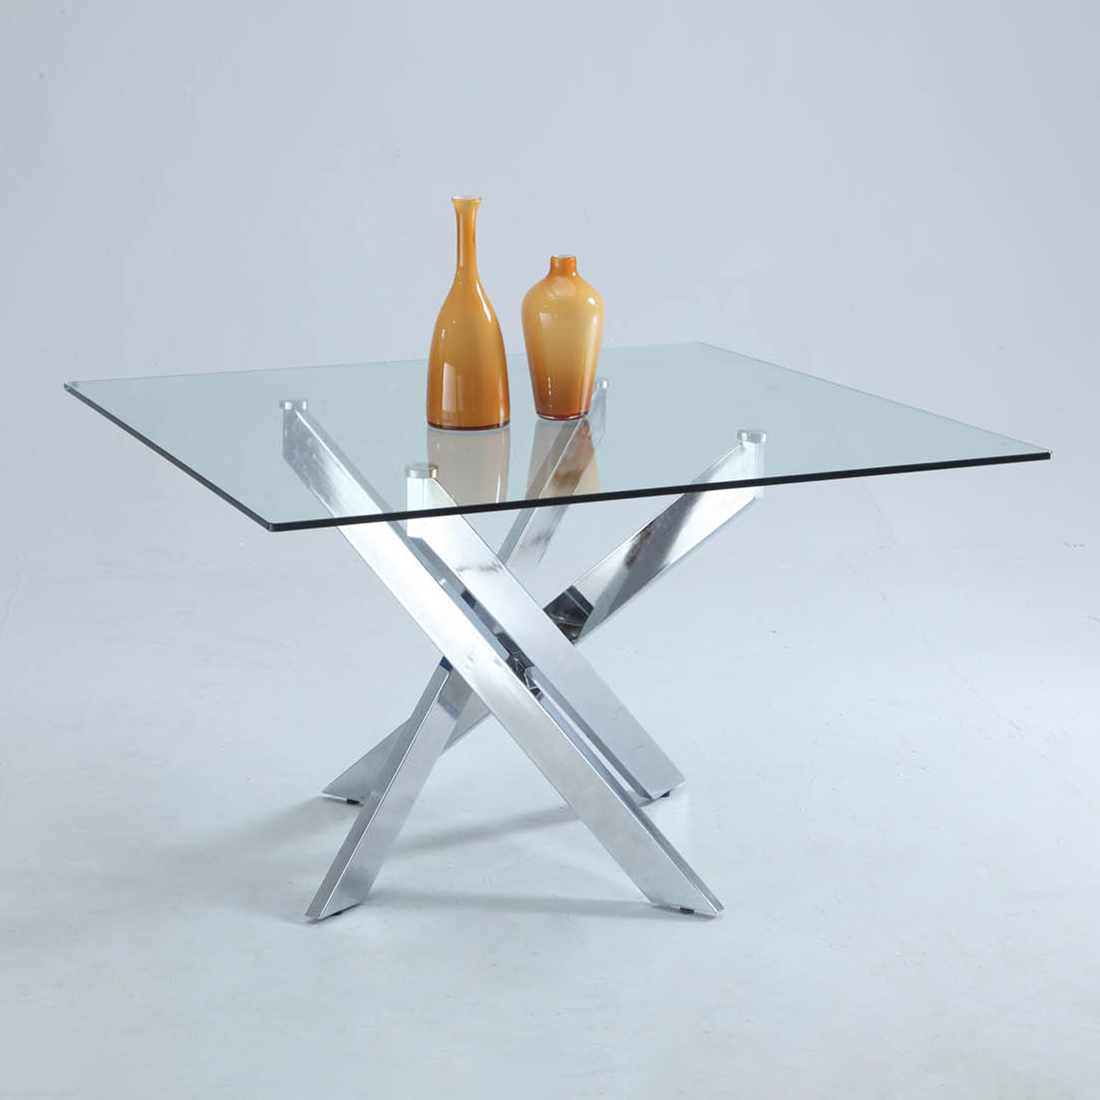 Pixie Small Rectangular Dining Table